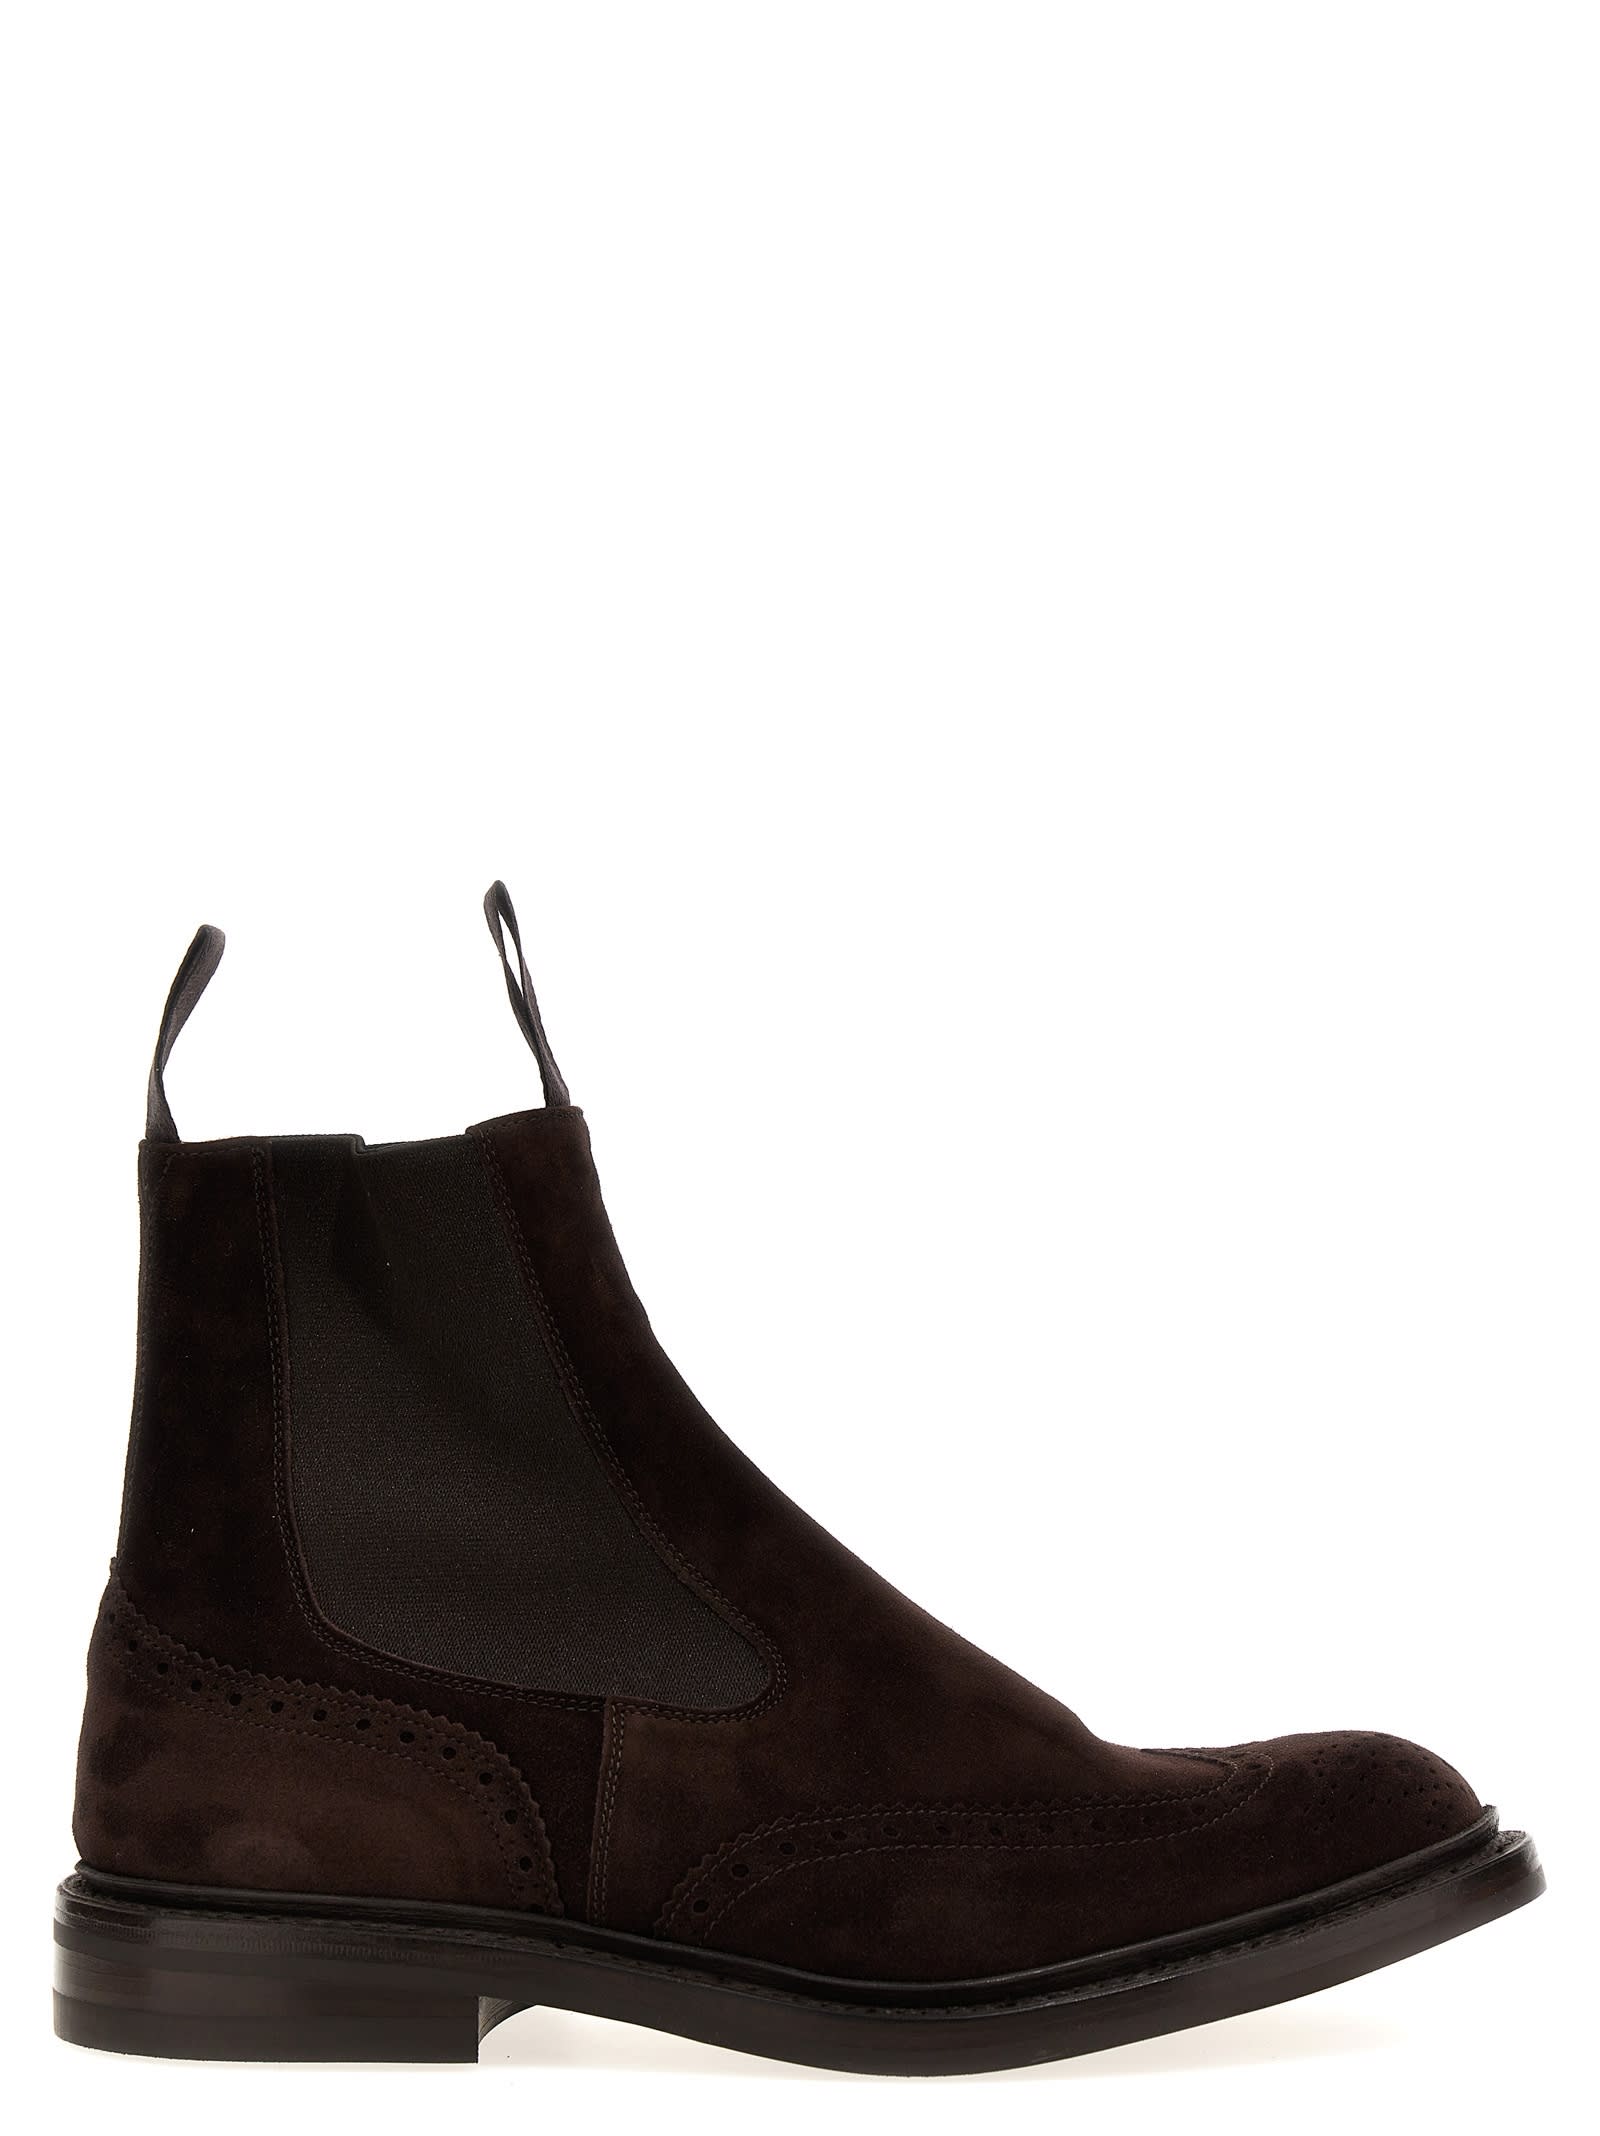 TRICKER'S HENRY ANKLE BOOTS